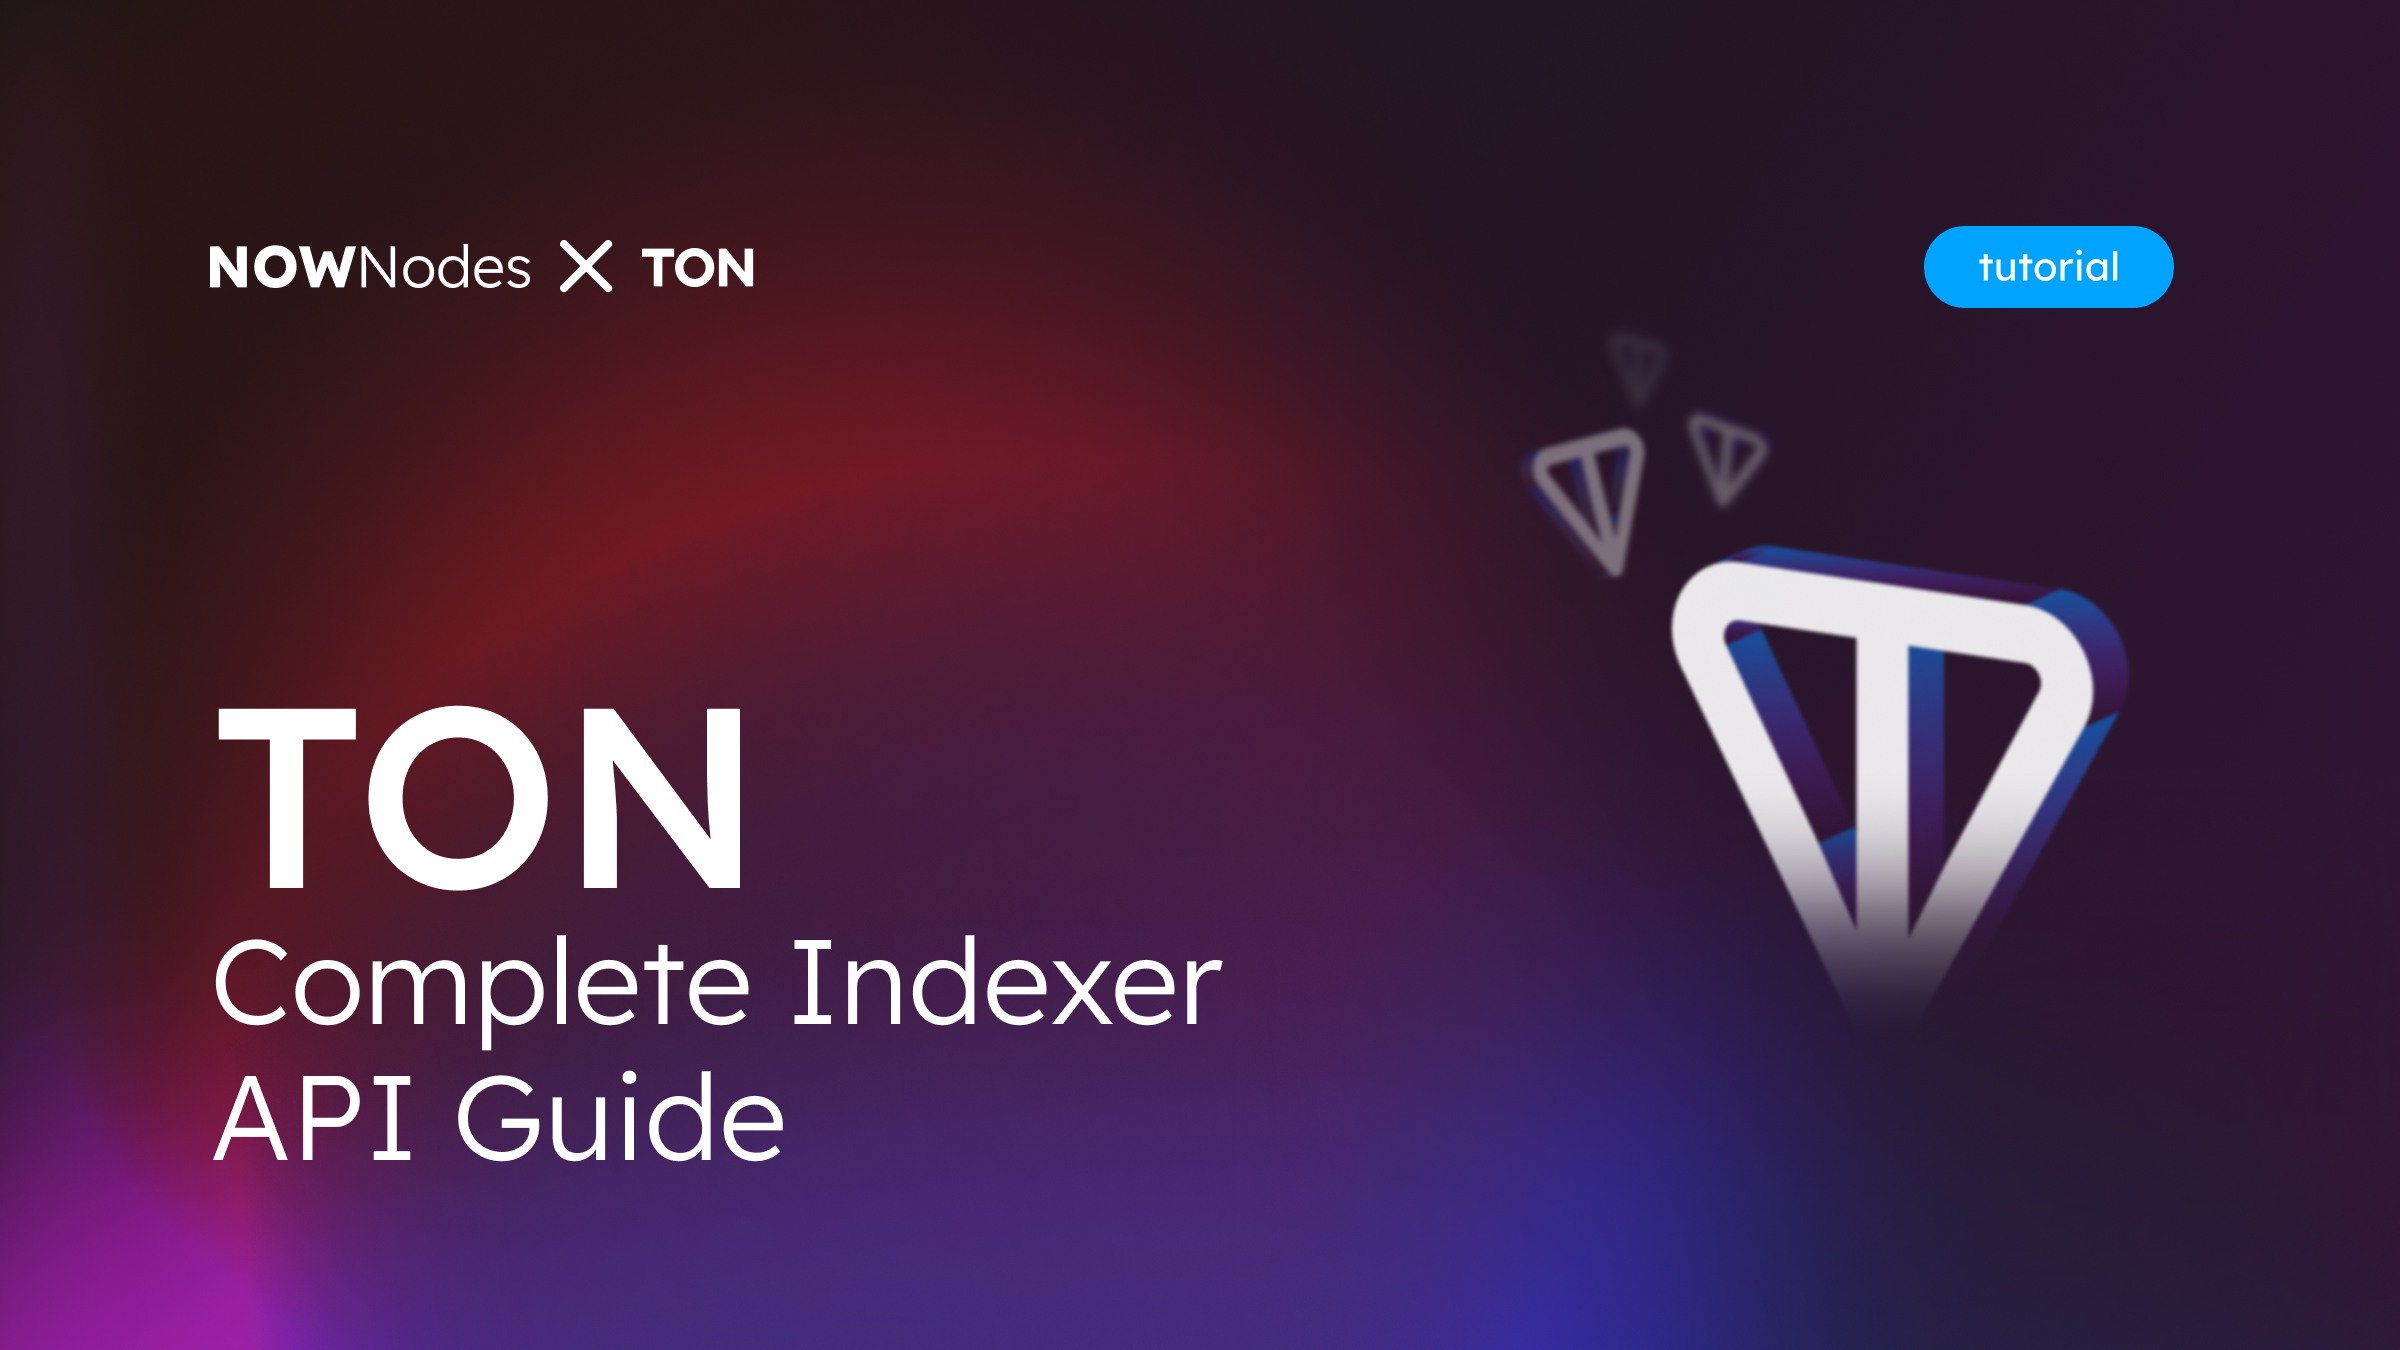 Discover TON Indexer API at NOWNodes